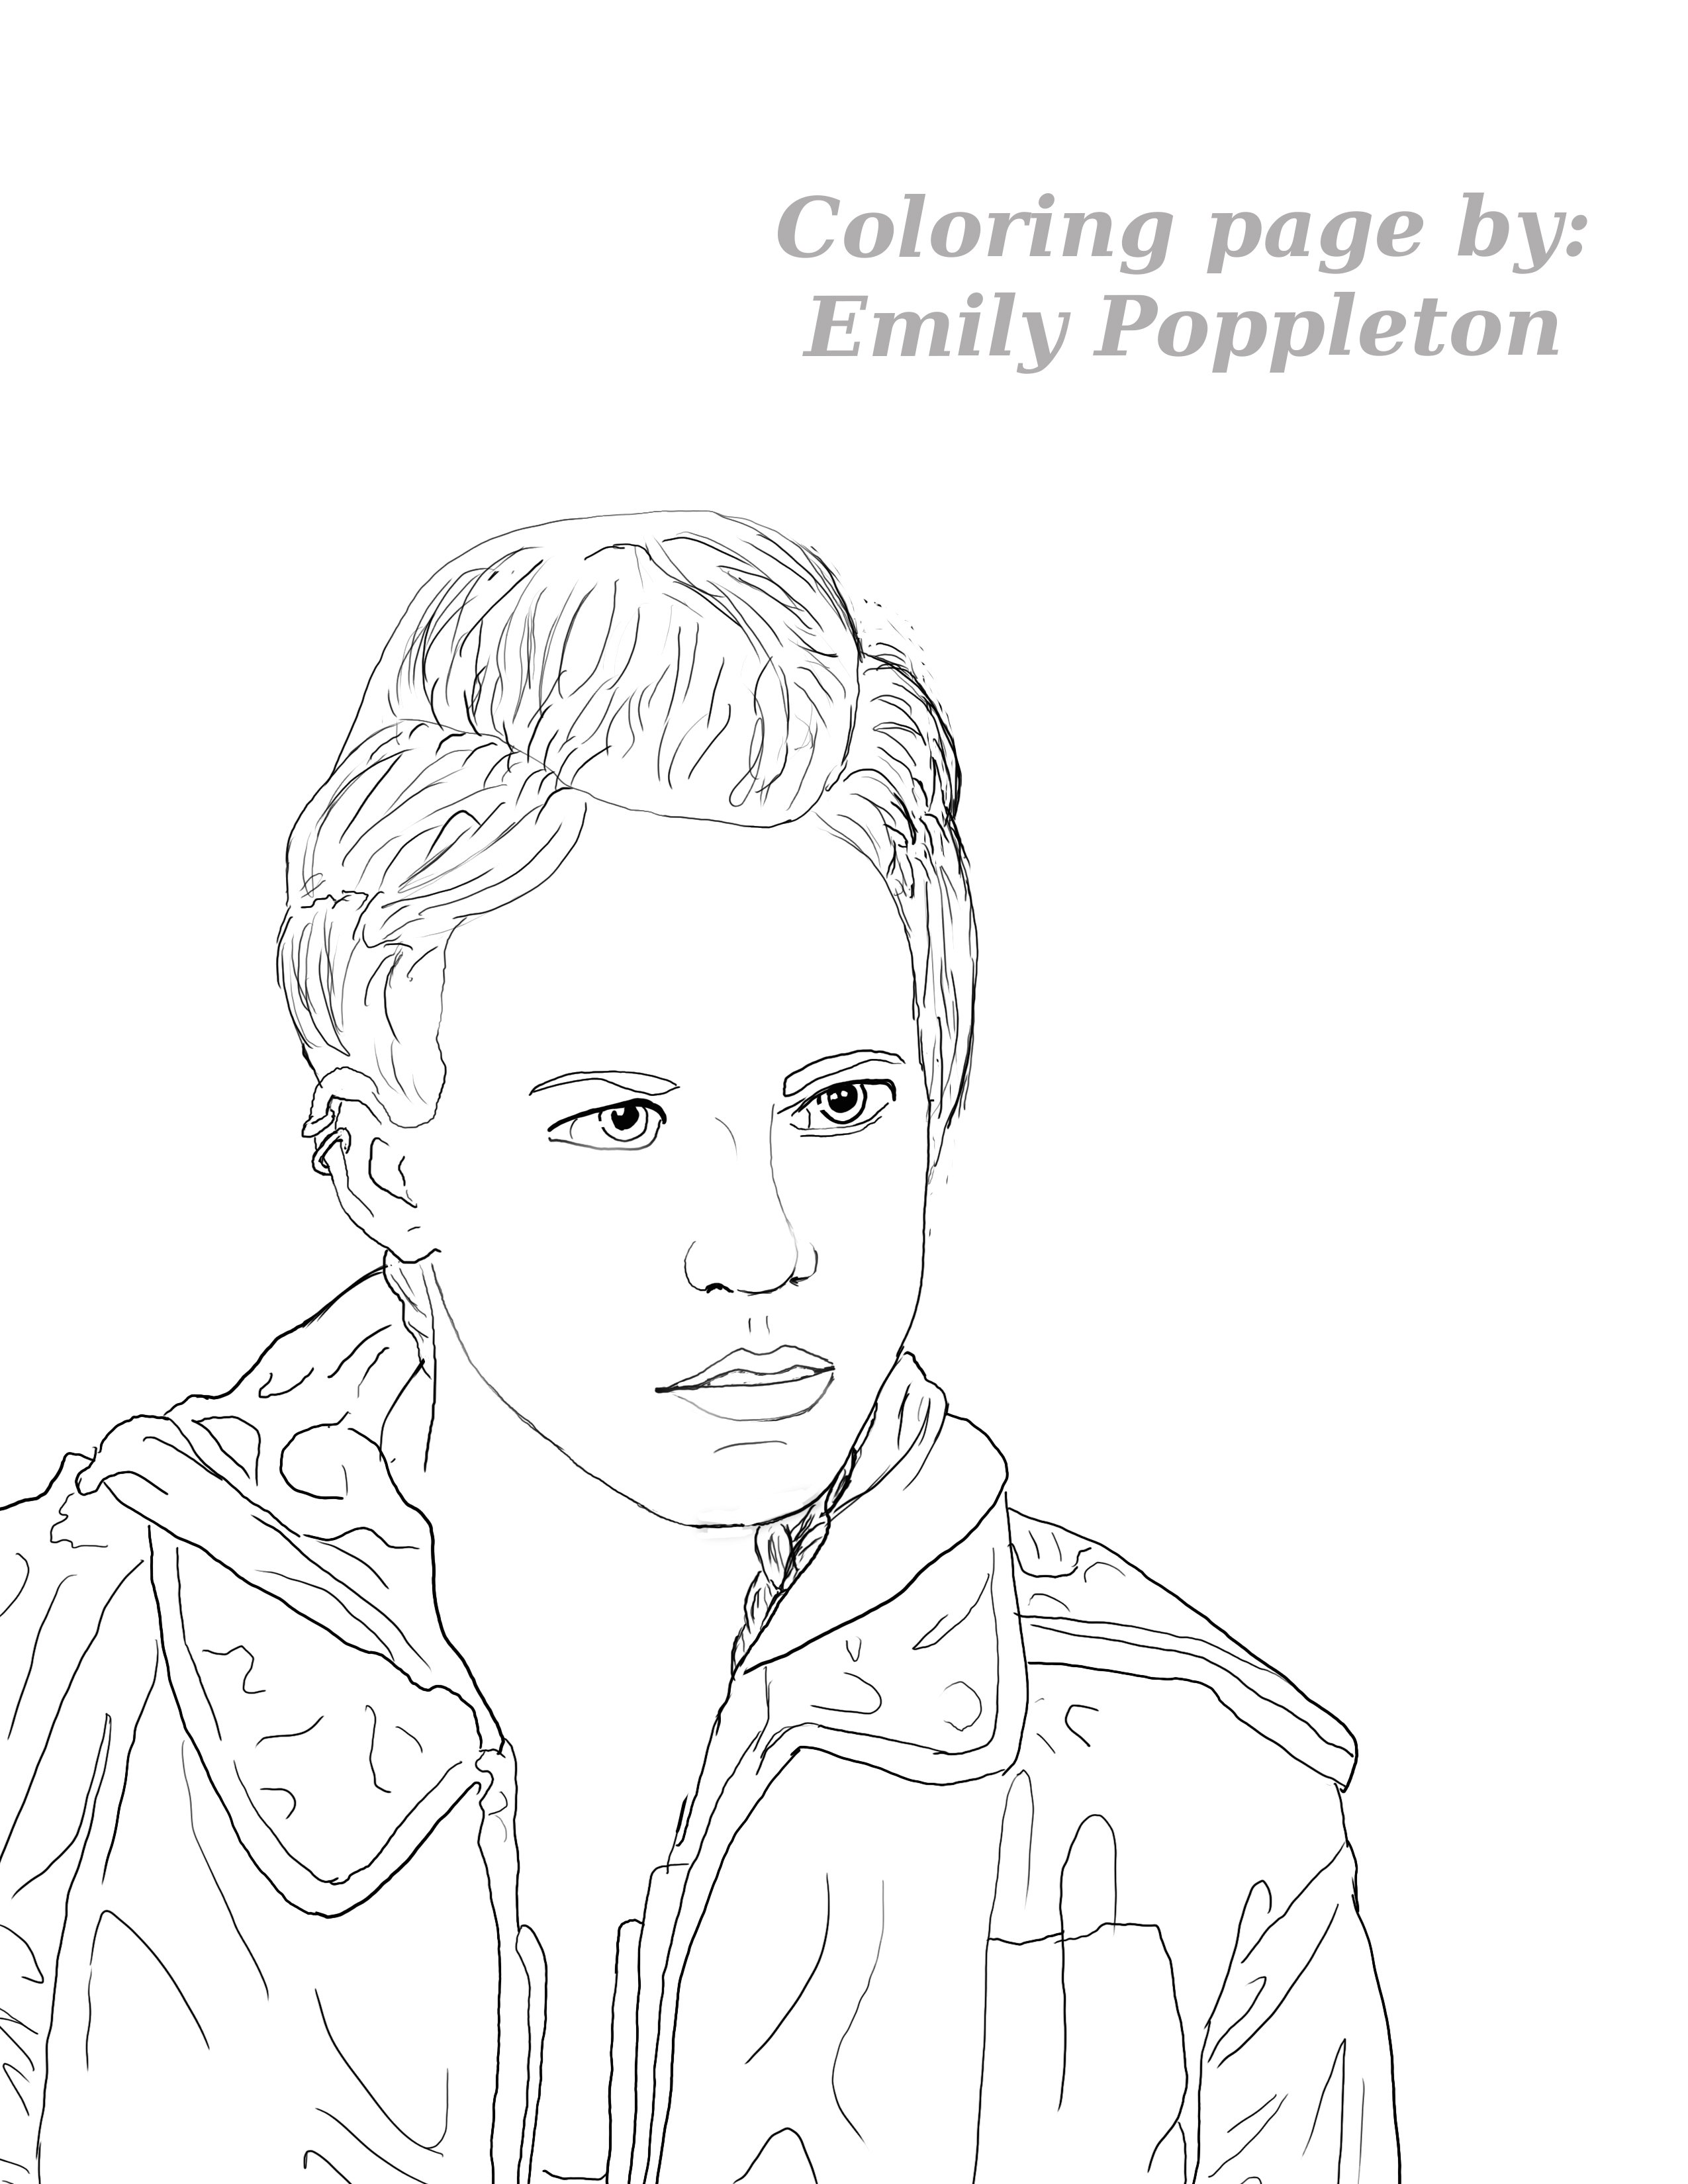 Emily poppleton art on x k here are the coloring pages i promised enjoy please share ur finished pics w me i would love to c them httpstcosrfxeyiq x